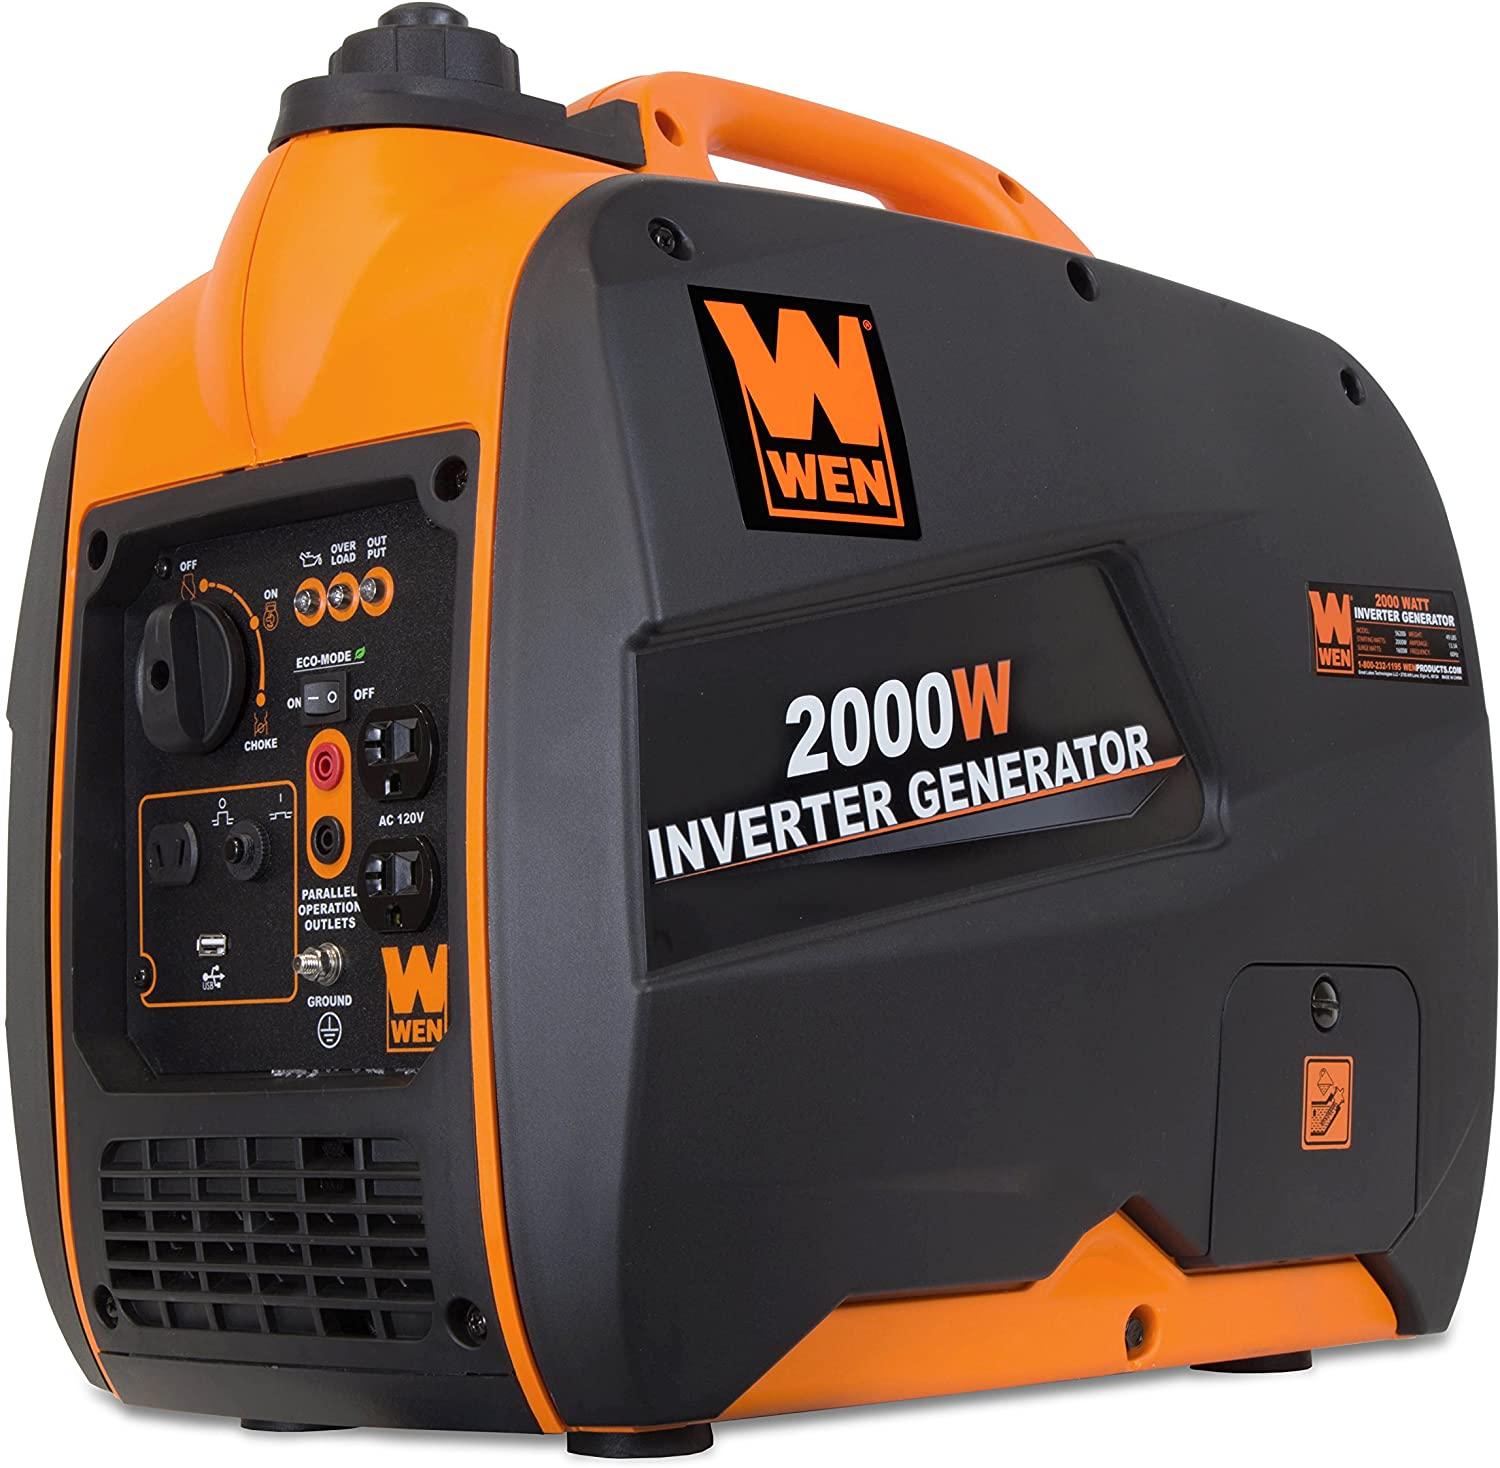 WEN Gas Powered Portable Inverter Generator for $335.99 Shipped